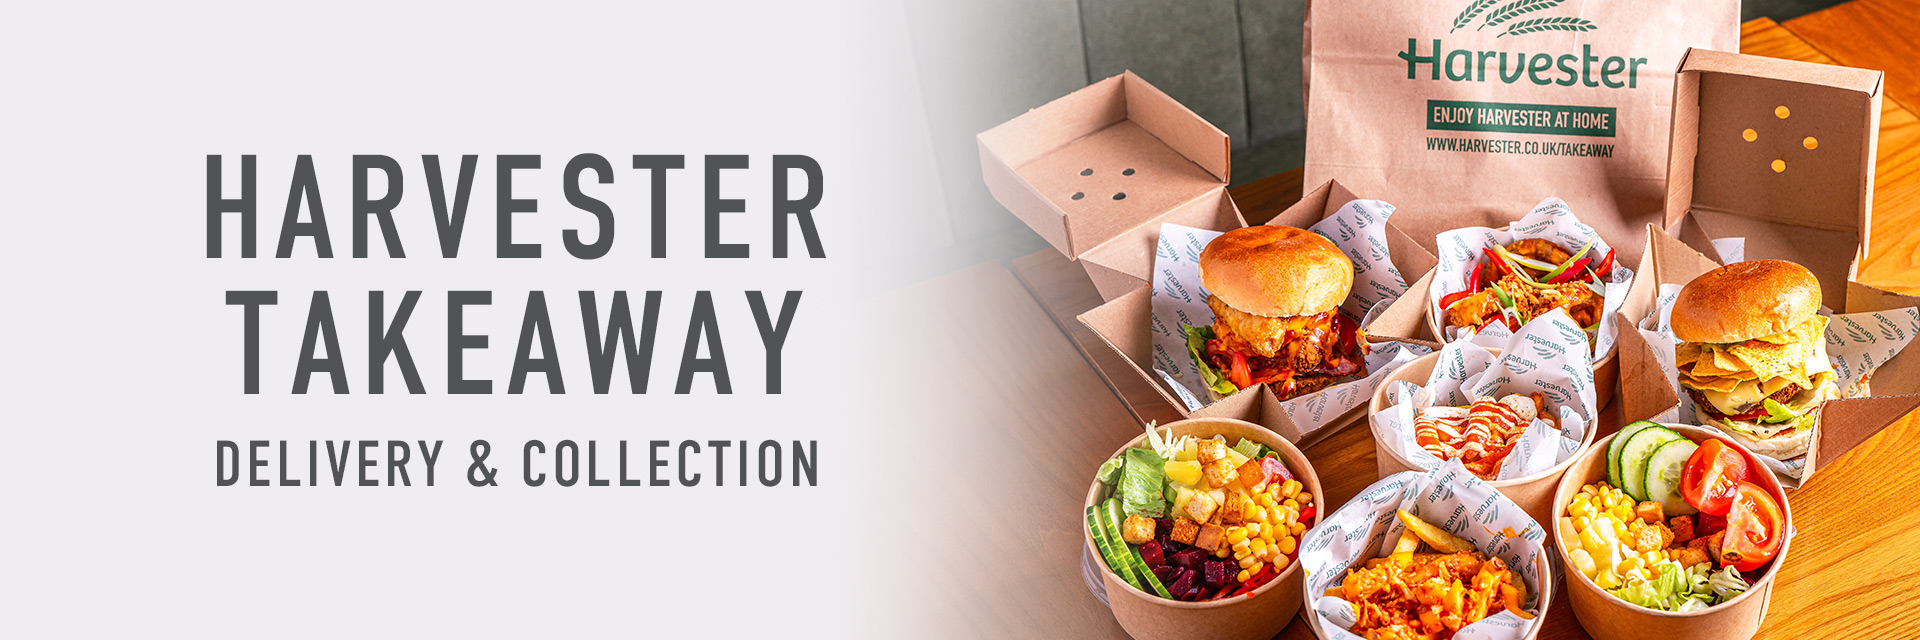 Harvester takeaway, delivery, collection